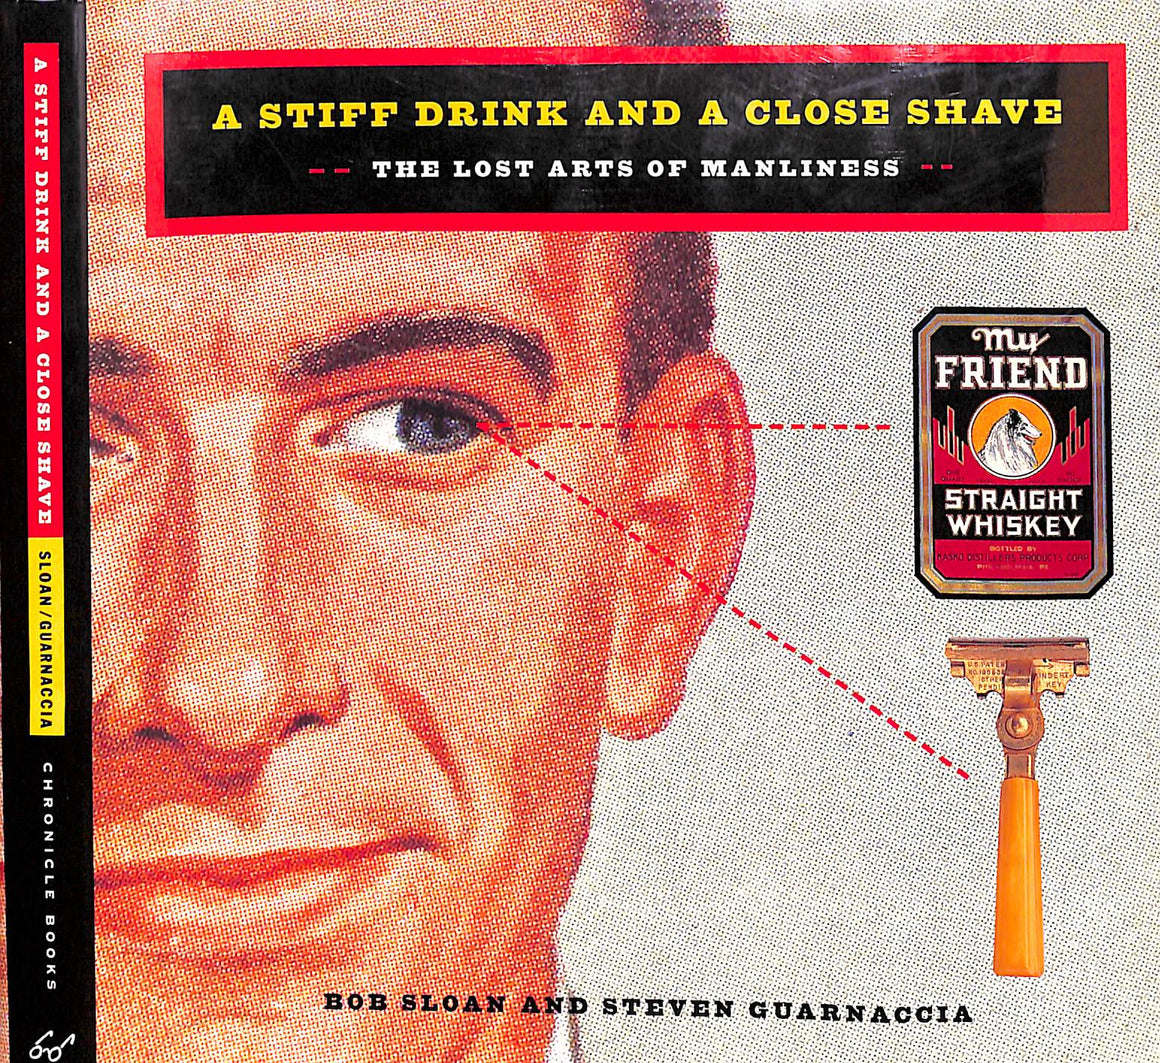 "A Stiff Drink And A Close Shave: The Lost Arts Of Manliness" 1995 SLOAN, Bob and GUARNACCIA, Steven